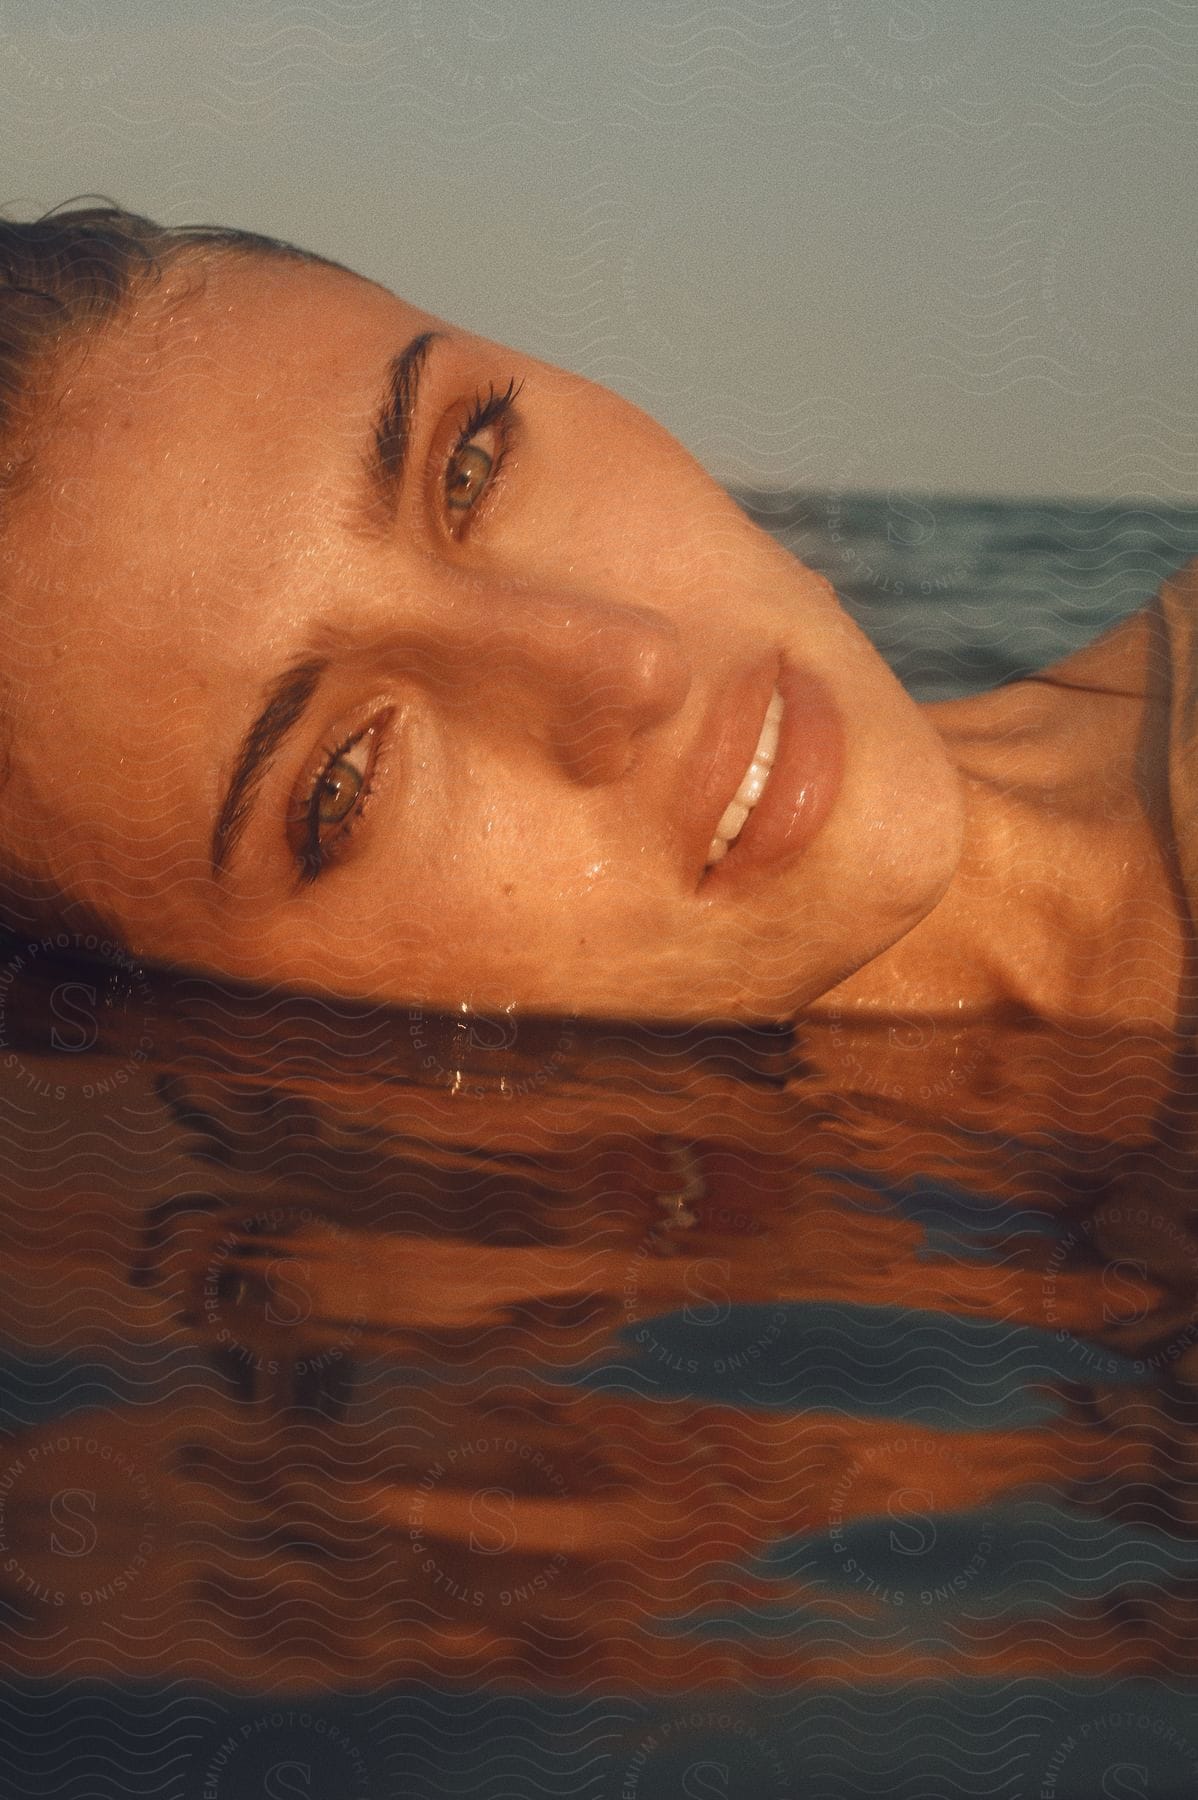 Stock photo of woman modeling with her face submerged in the sea, her bright eyes visible on a cloudy day.